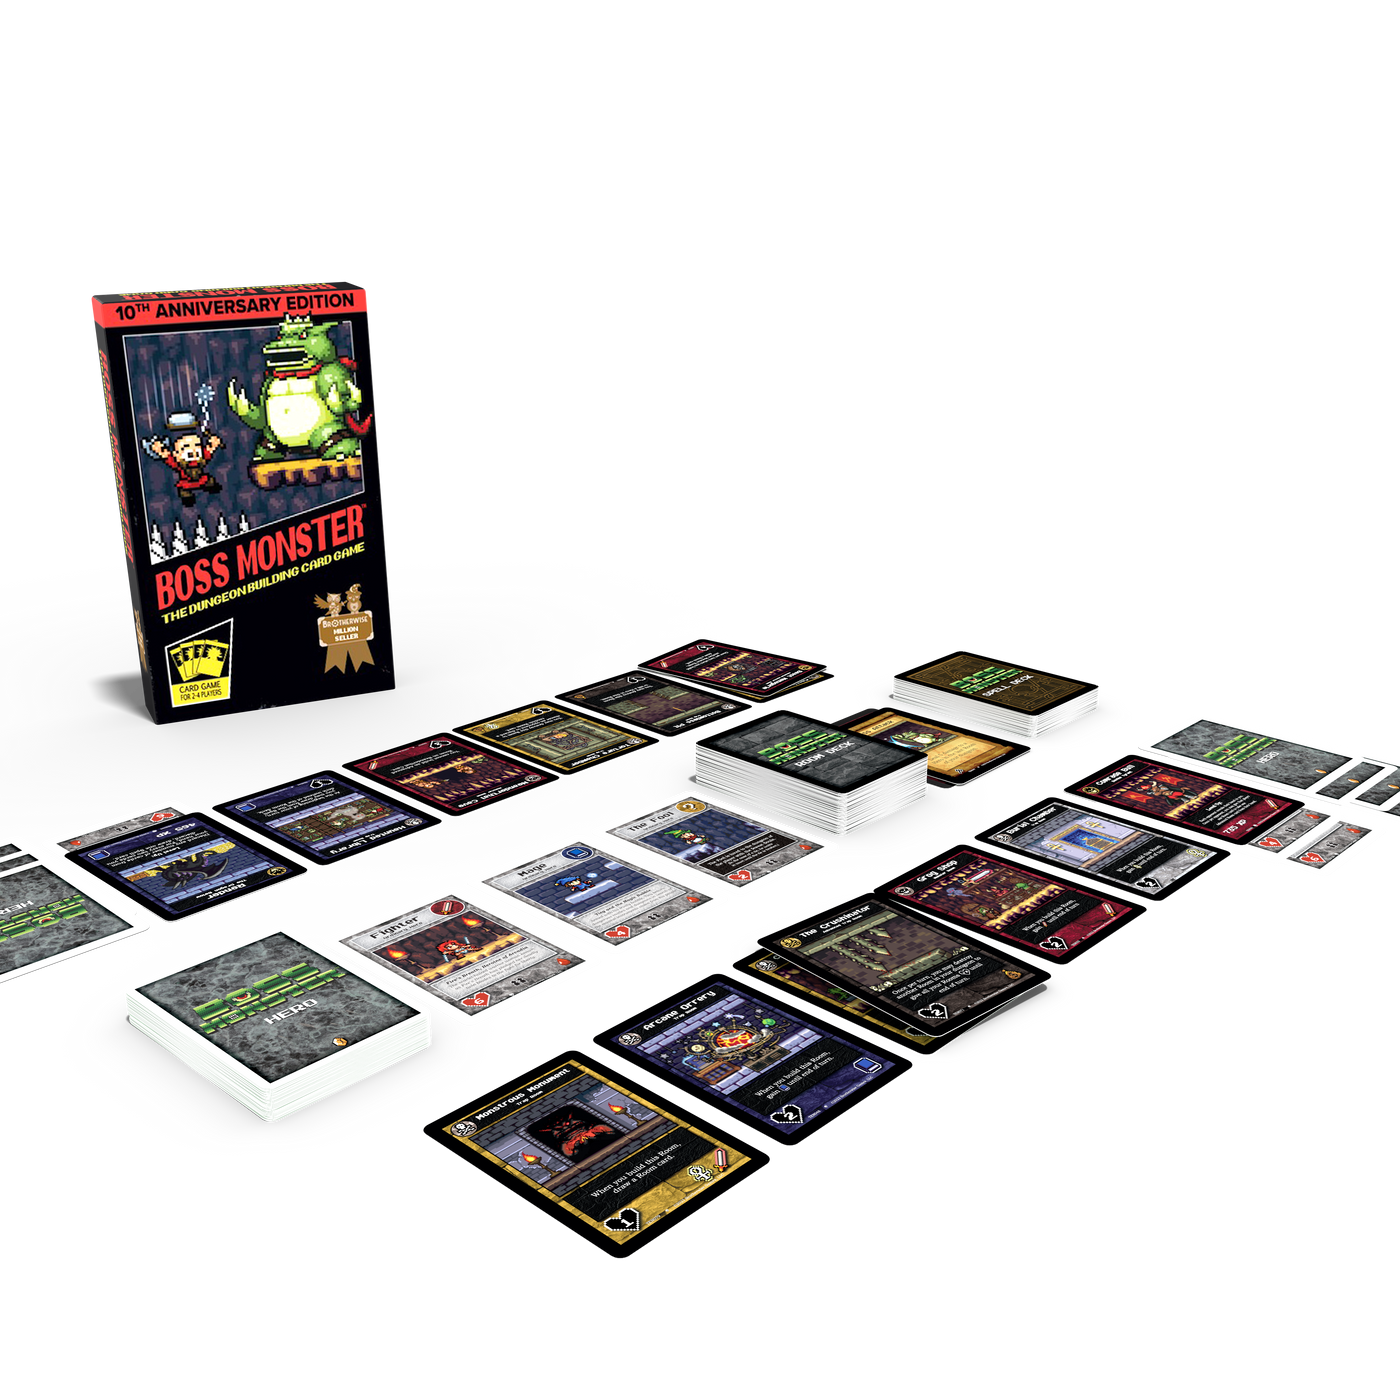 Boss Monster: The Dungeon Building Card Game - 10th Anniversary Edition